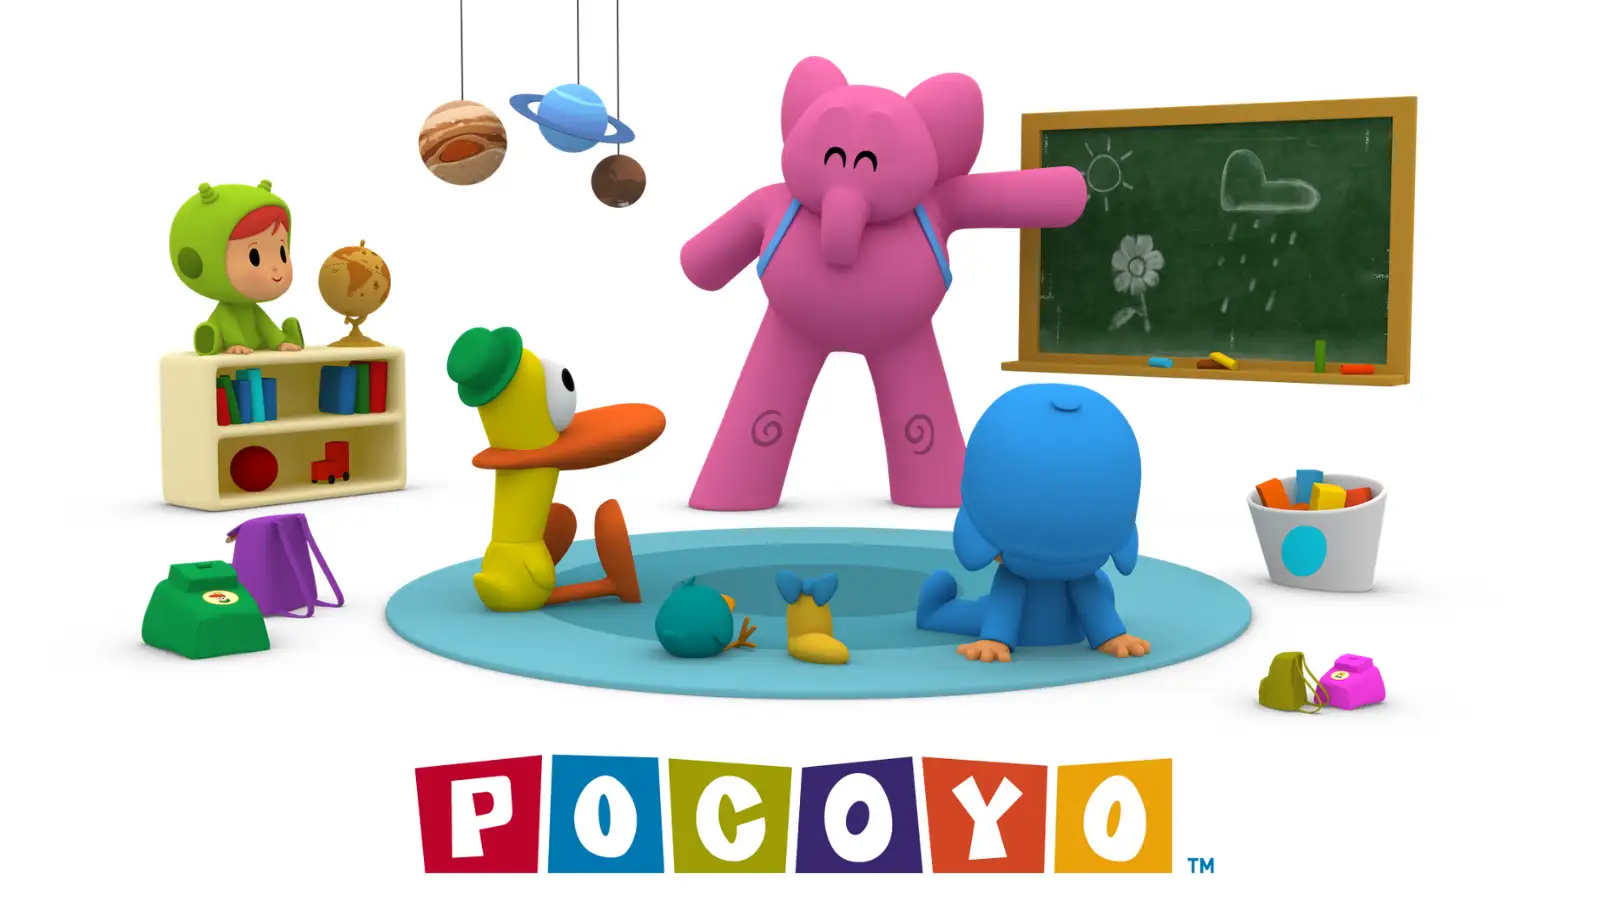 Pocoyo is a great show for toddlers and preschoolers to learn new words, ABC’s, colors, shapes, daily routines, and emotional intelligence.